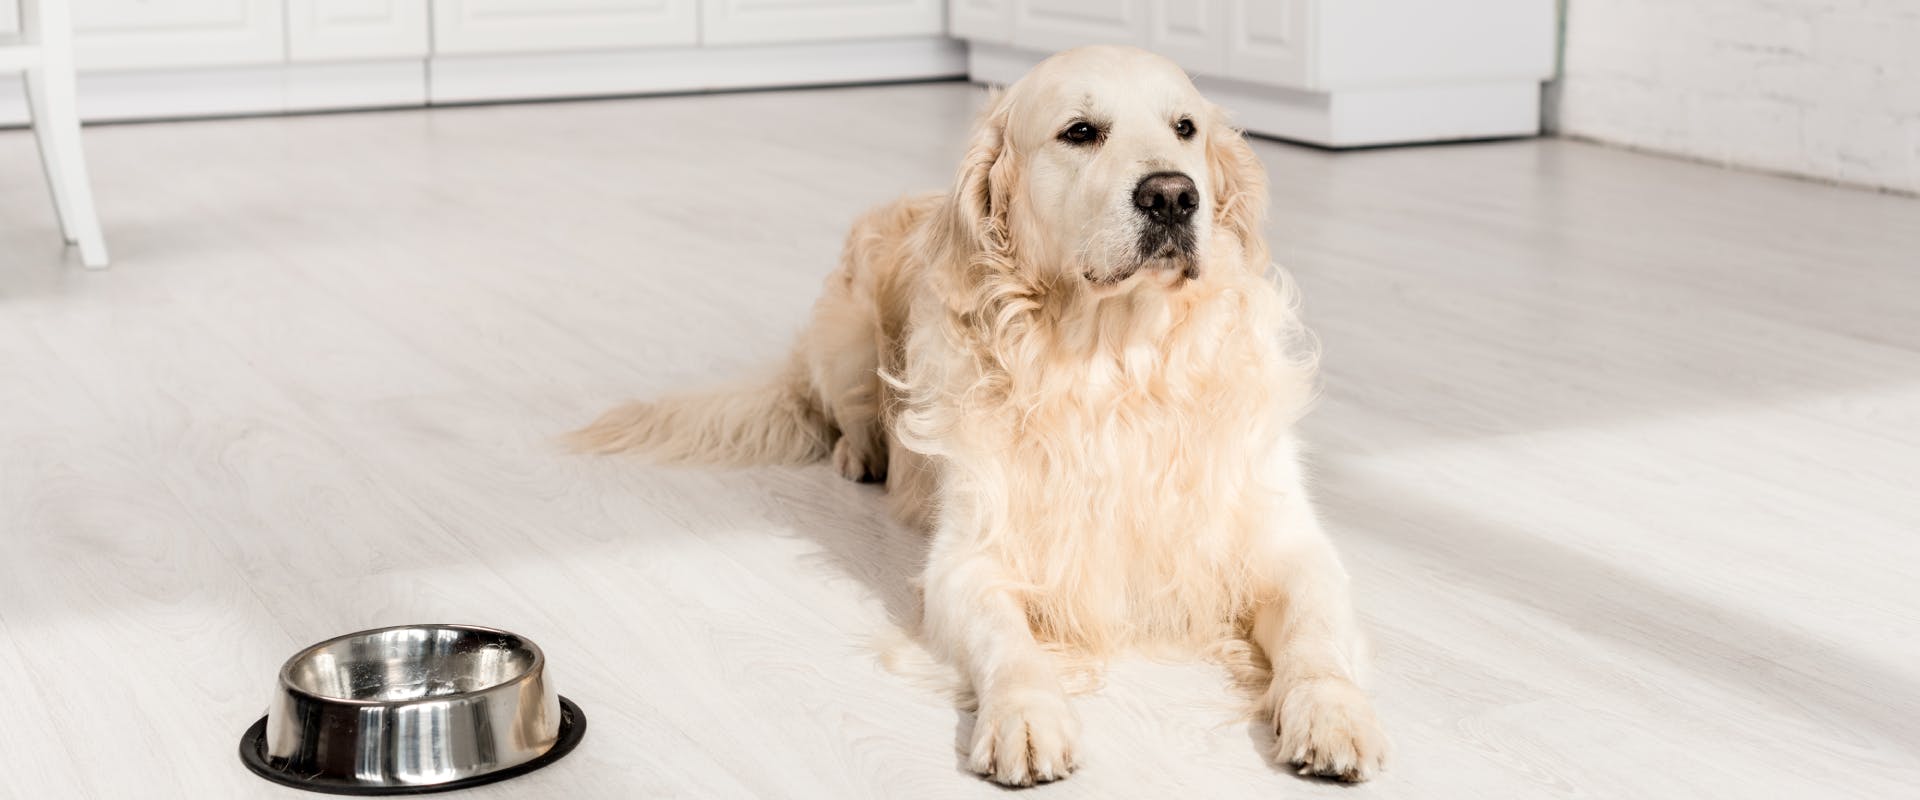 a golden retriever sat up while lying on its stomach on a wooden kitchen floor next to an empty silver dog bowl